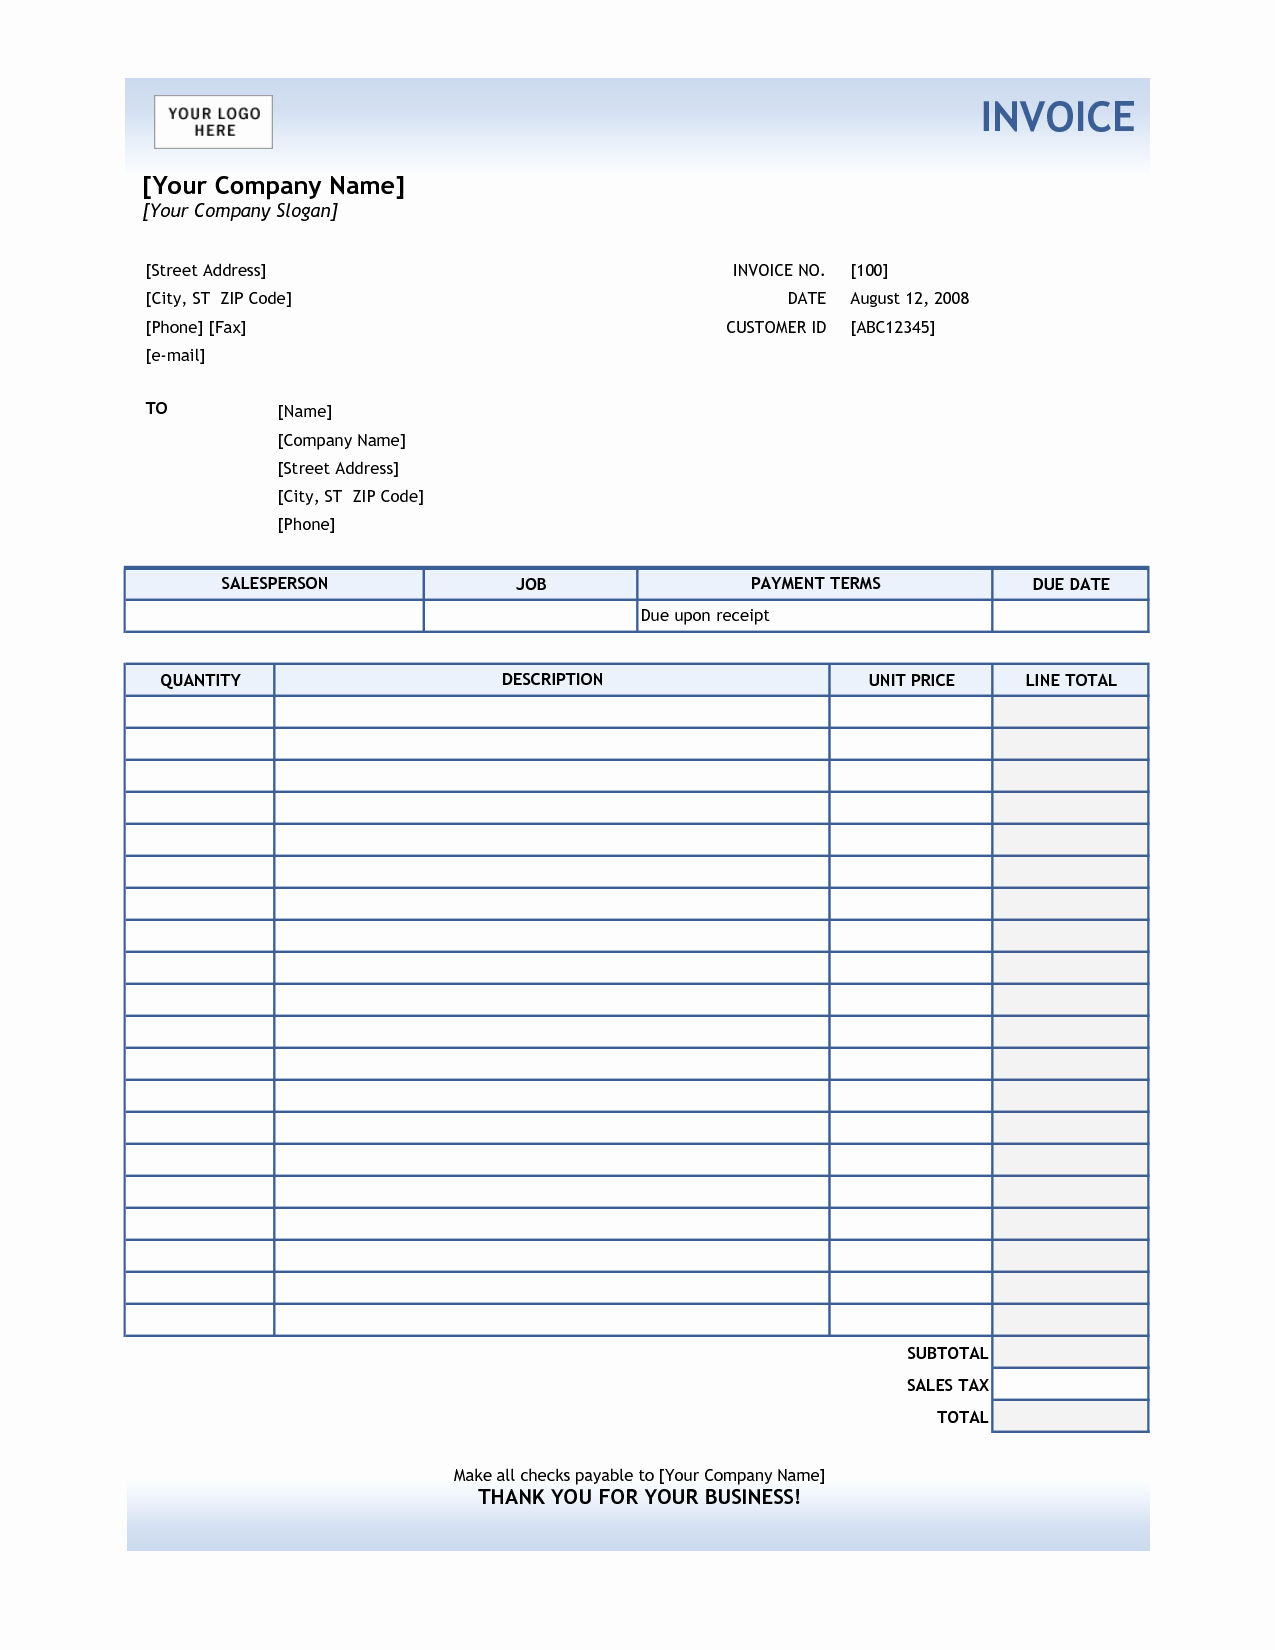 Excel Invoice Template Free Download Beautiful Service Invoice Template Excel